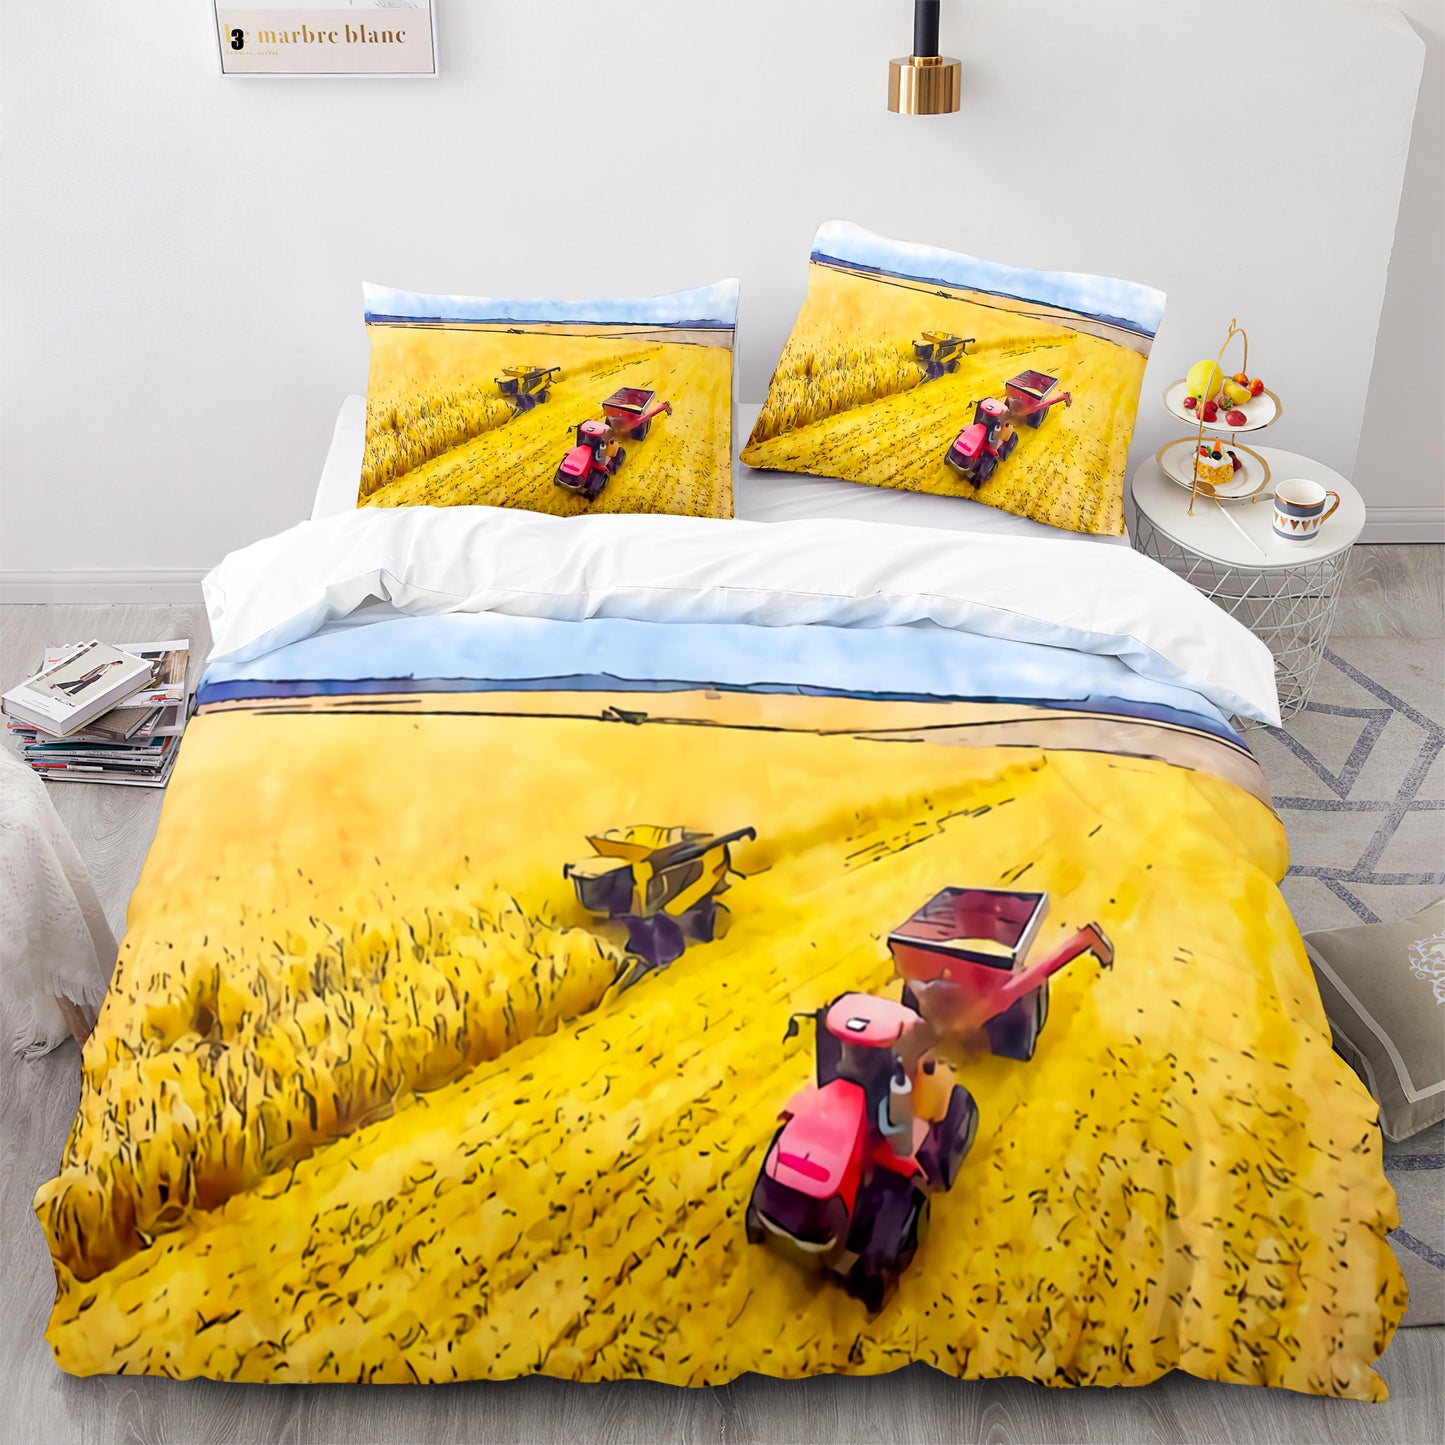 Duvet cover agricultural tractor